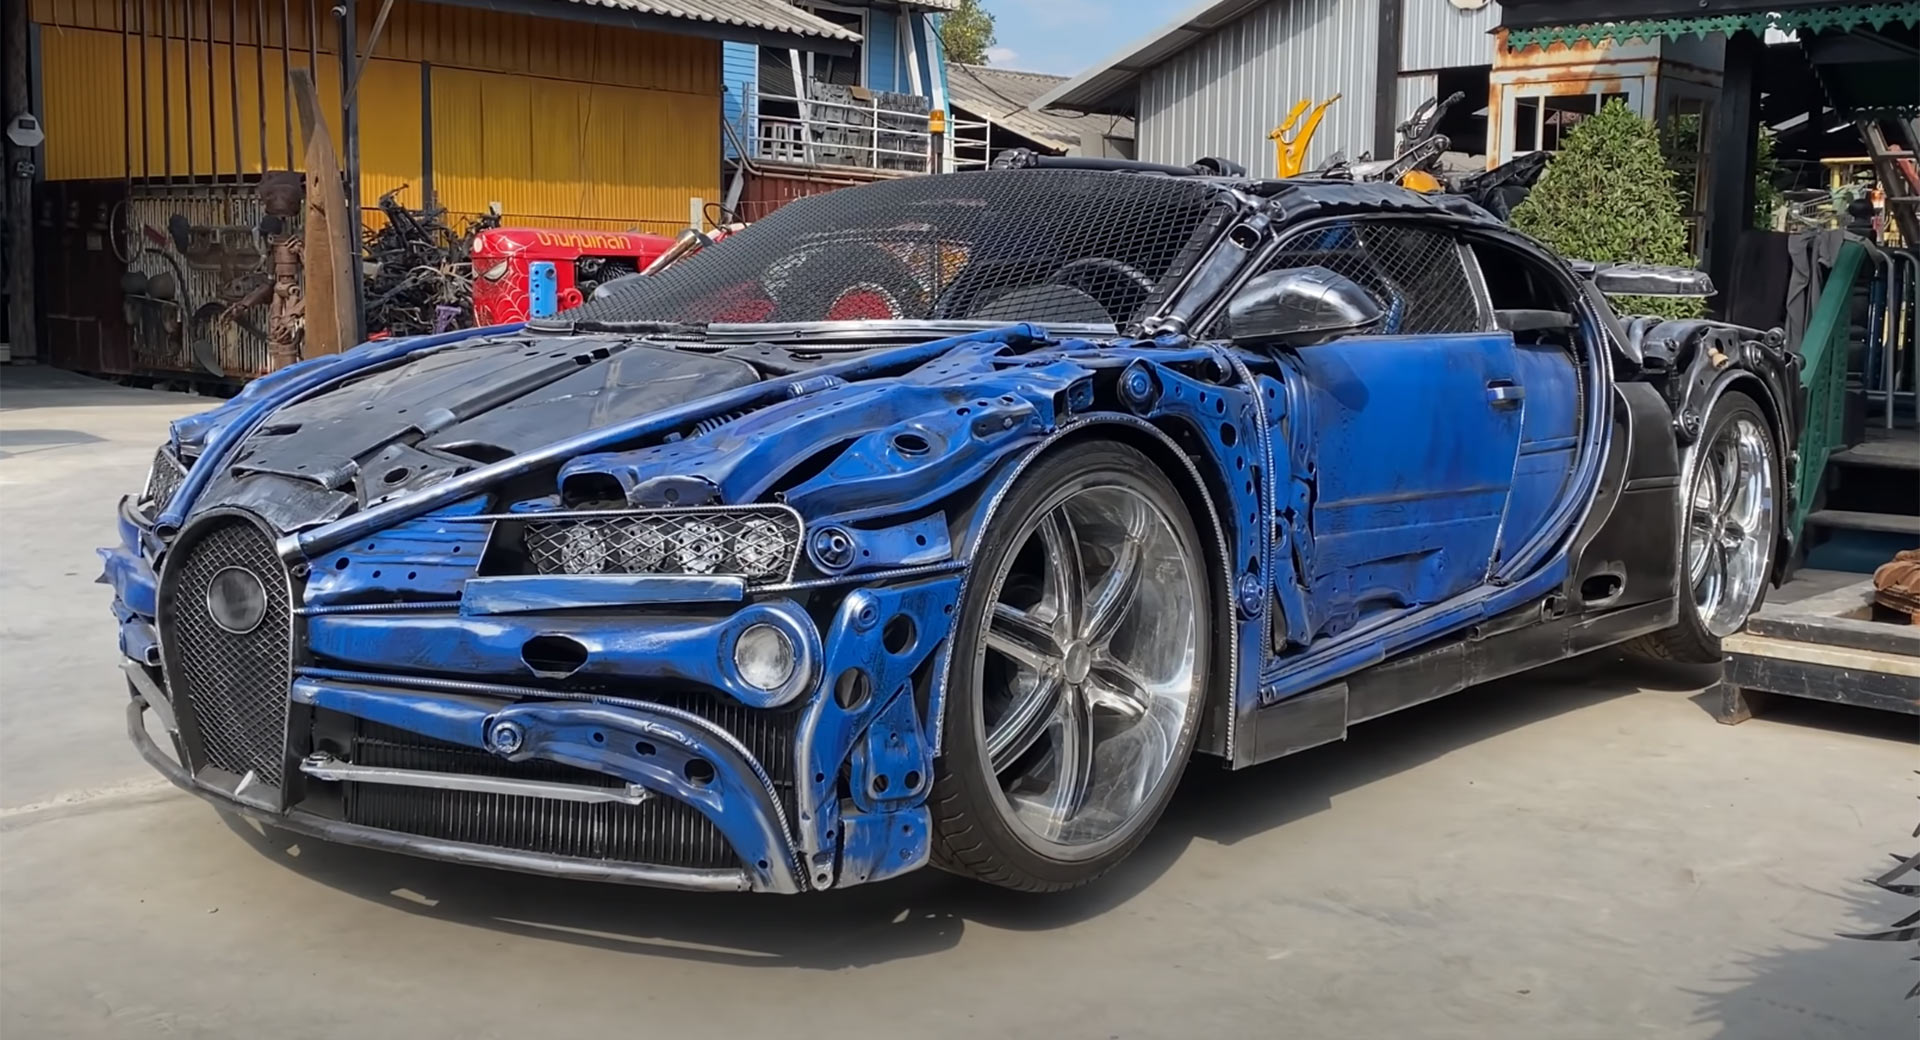 Check Out This Bugatti Chiron Replica Made From Scrap Metal In Thailand